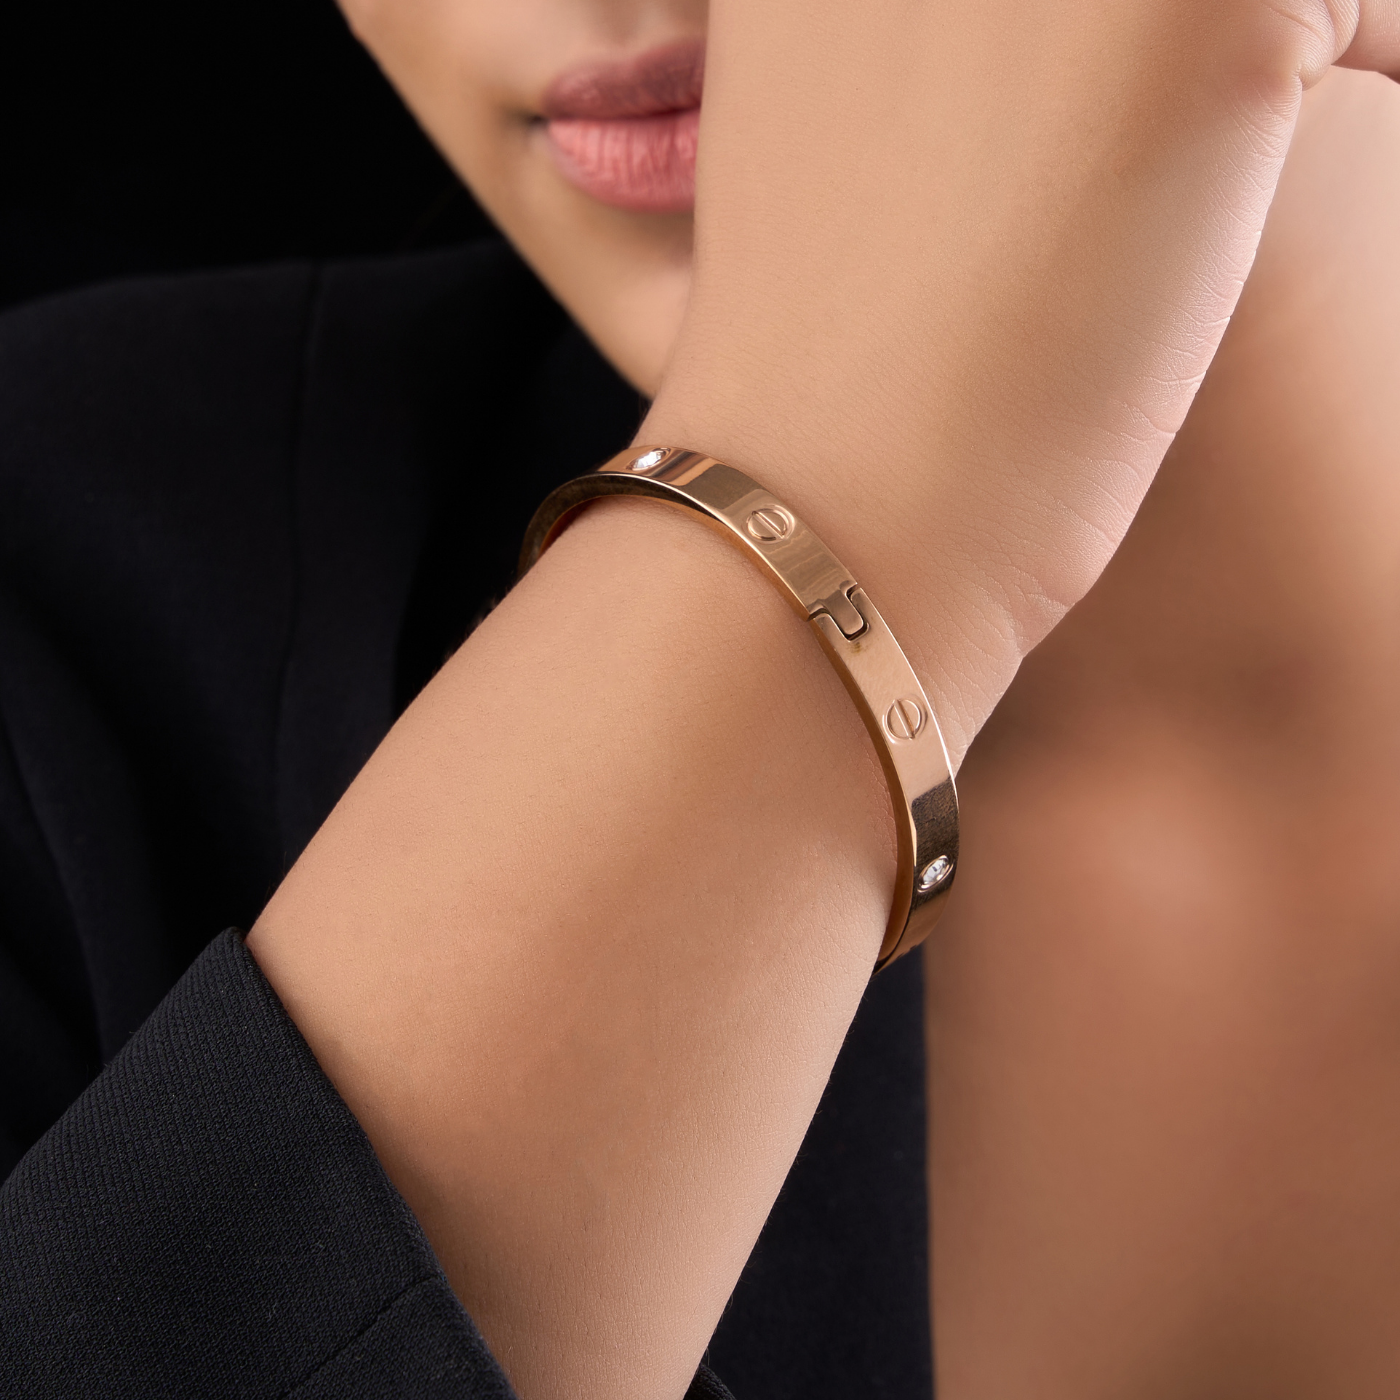 Cartier Bracelets Online At Discounted Price - Shop At Dilli Bazar